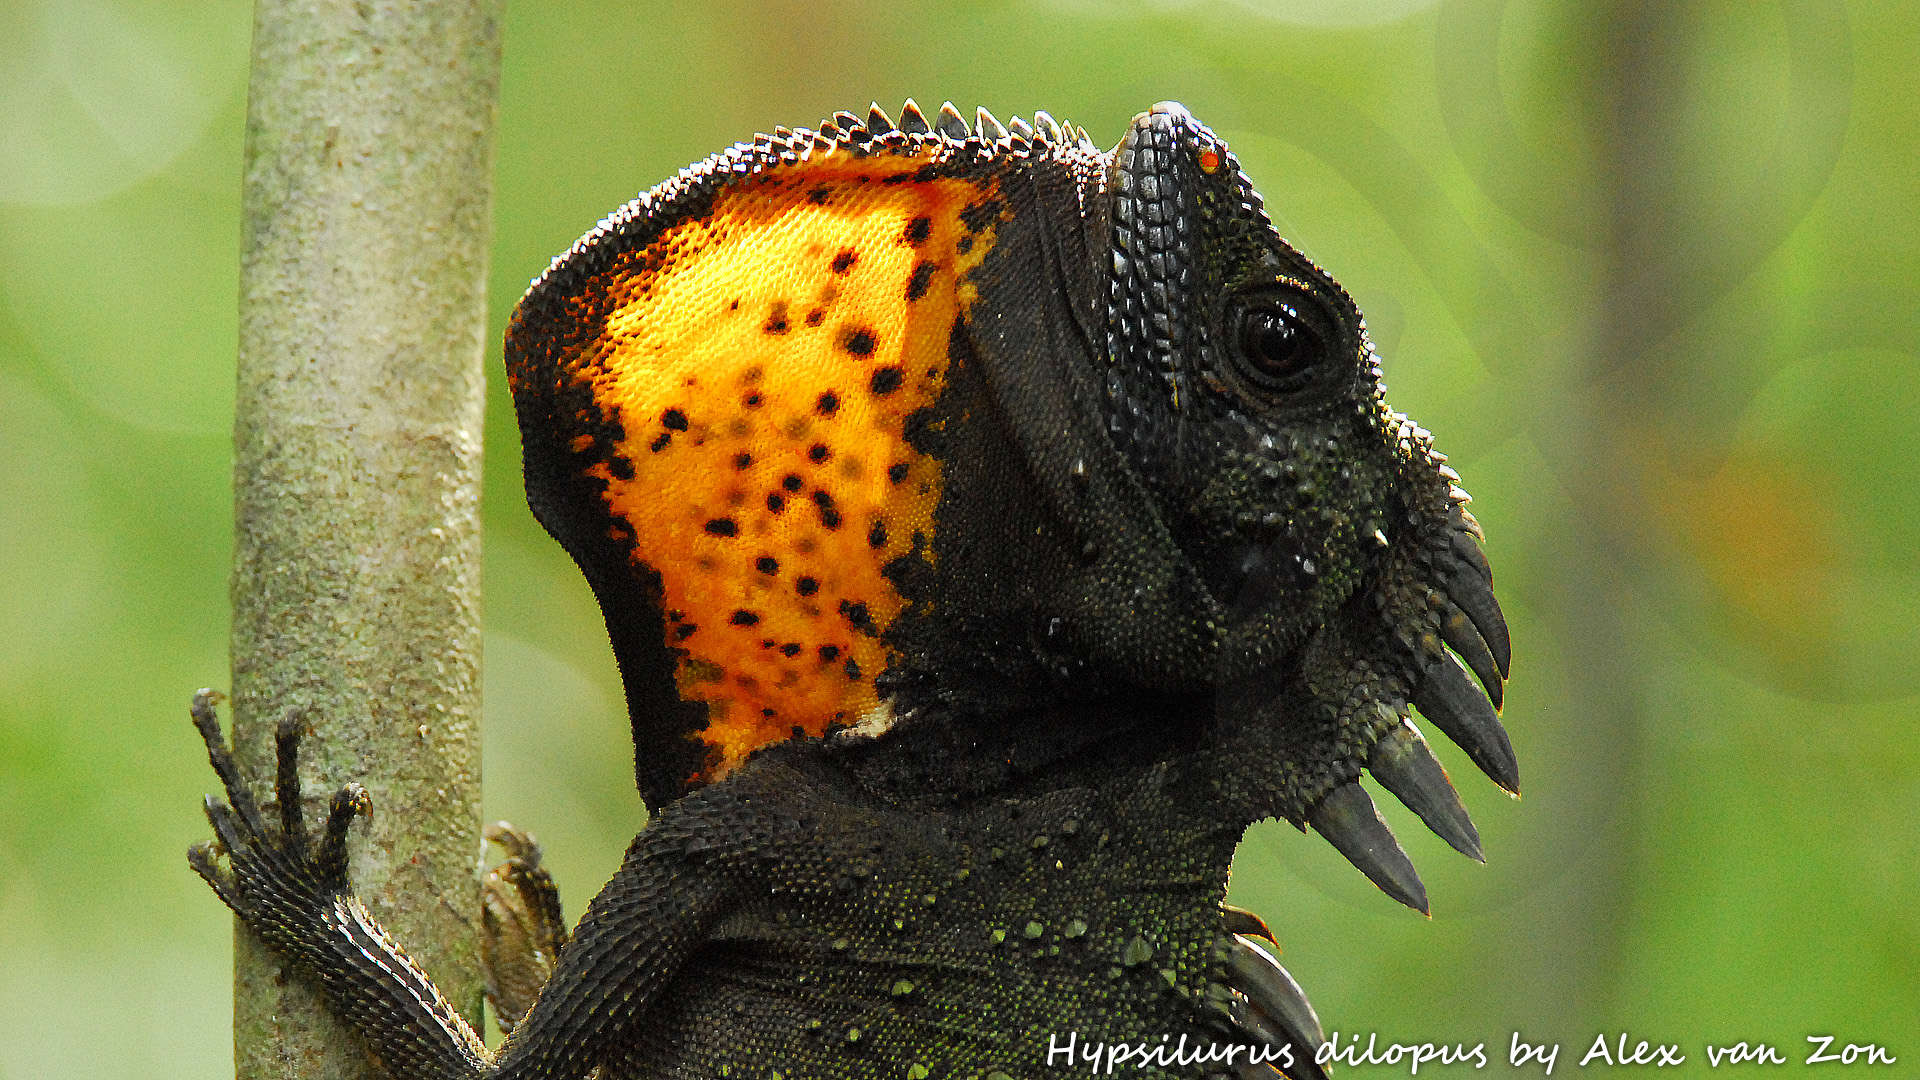 The forest dragon Hypsilurus dilopus is a relatively widespread New Guinea lowland lizard that varies geographically in its color pattern and may well represent a species complex. Copyright © Alex van Zon